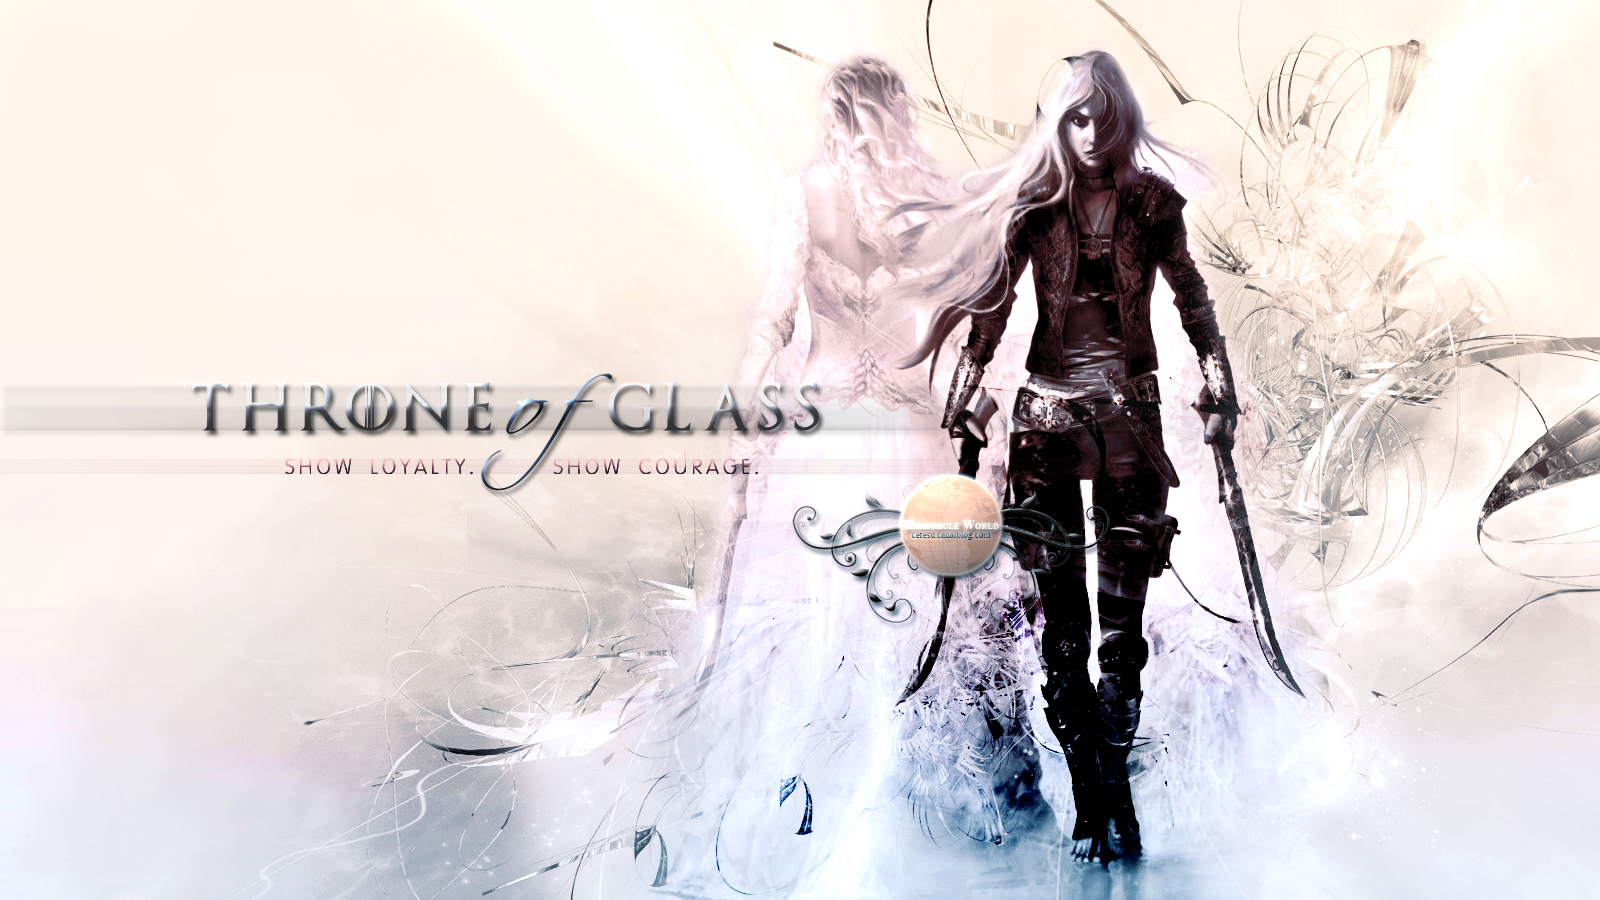 Throne of glass wallpapers throne of glass throne of glass fanart throne of glass characters